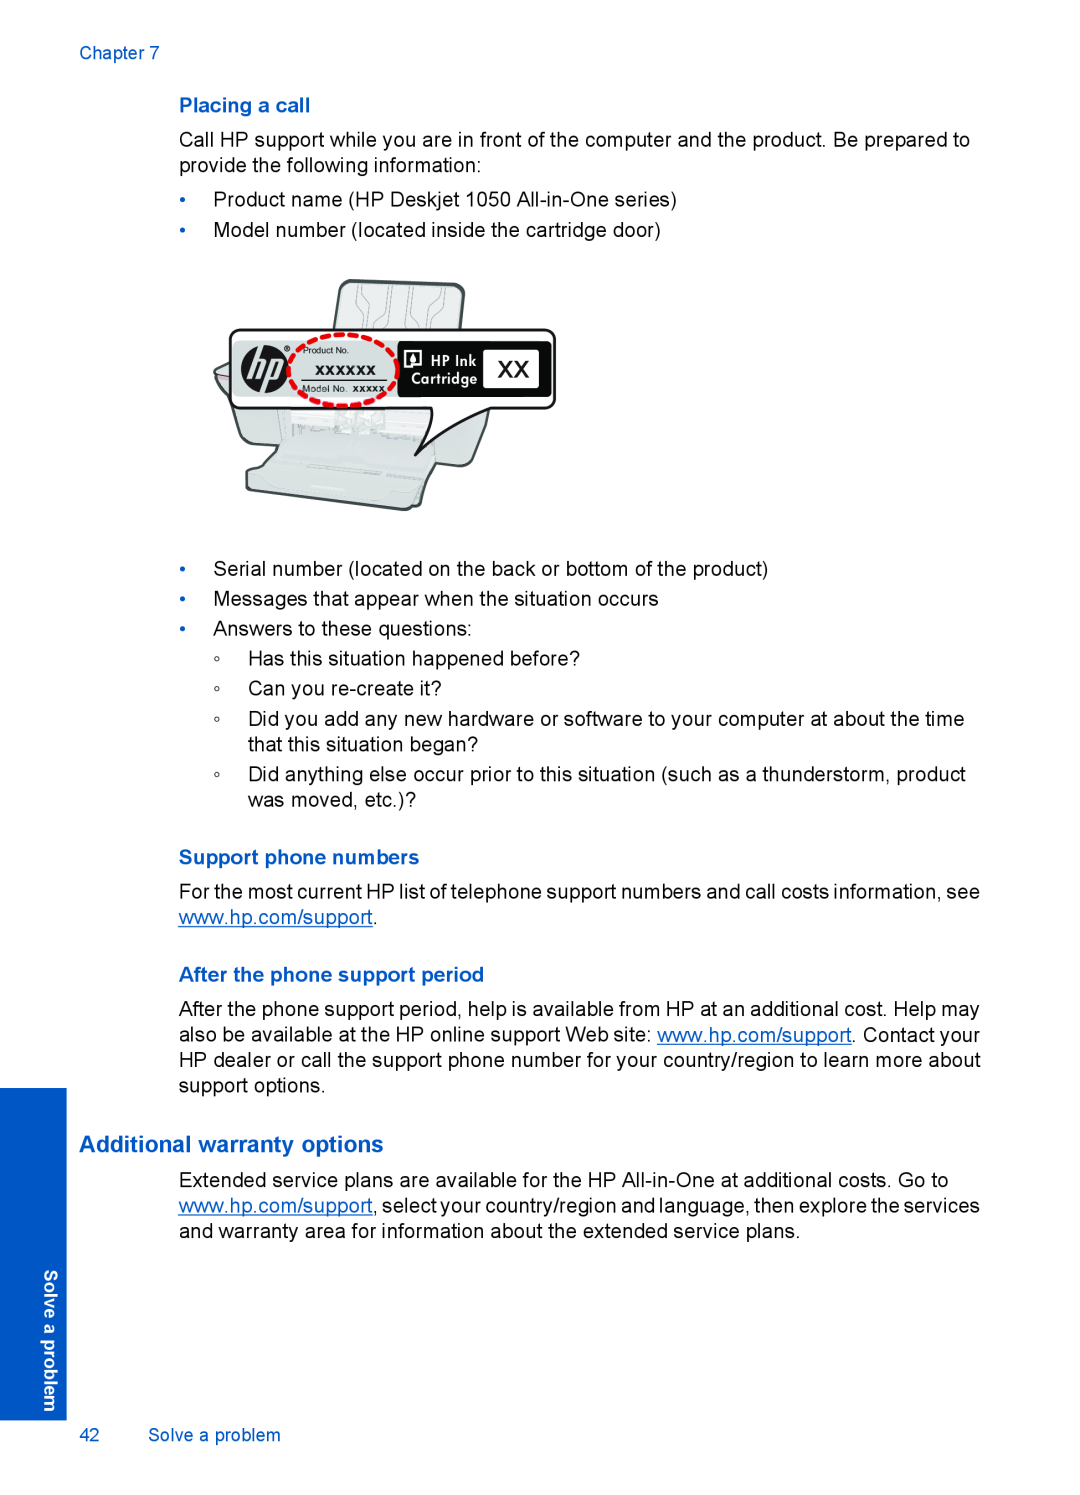 HP 1051, 1050 - J410a Additional warranty options, Placing a call, Support phone numbers, After the phone support period 